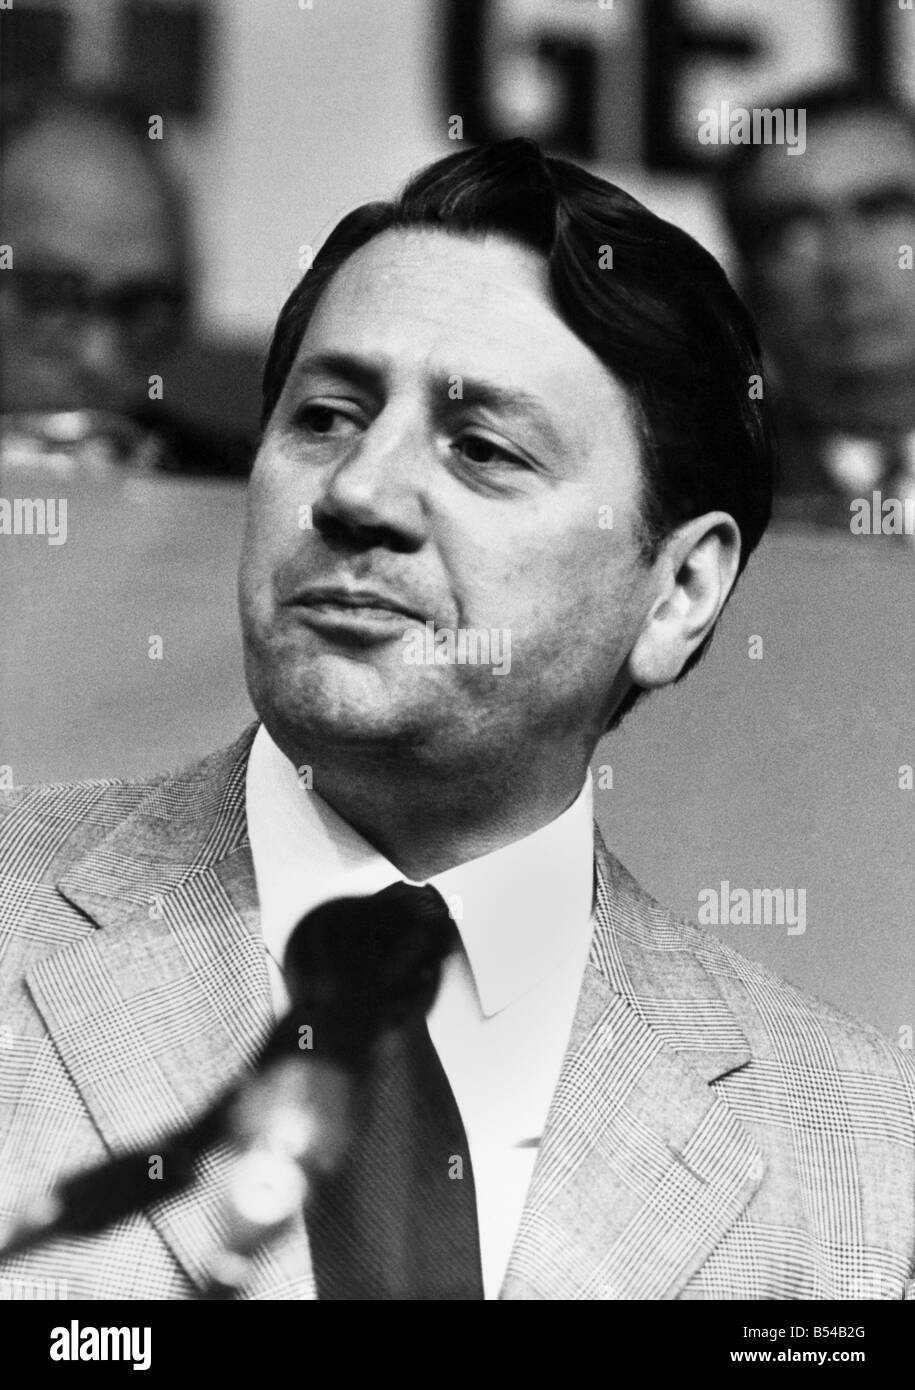 Norman Atkinson MP for 'Tottenham,' photographed during the 1971 Labour Party Conference at Brighton this month. October 1971 Stock Photo